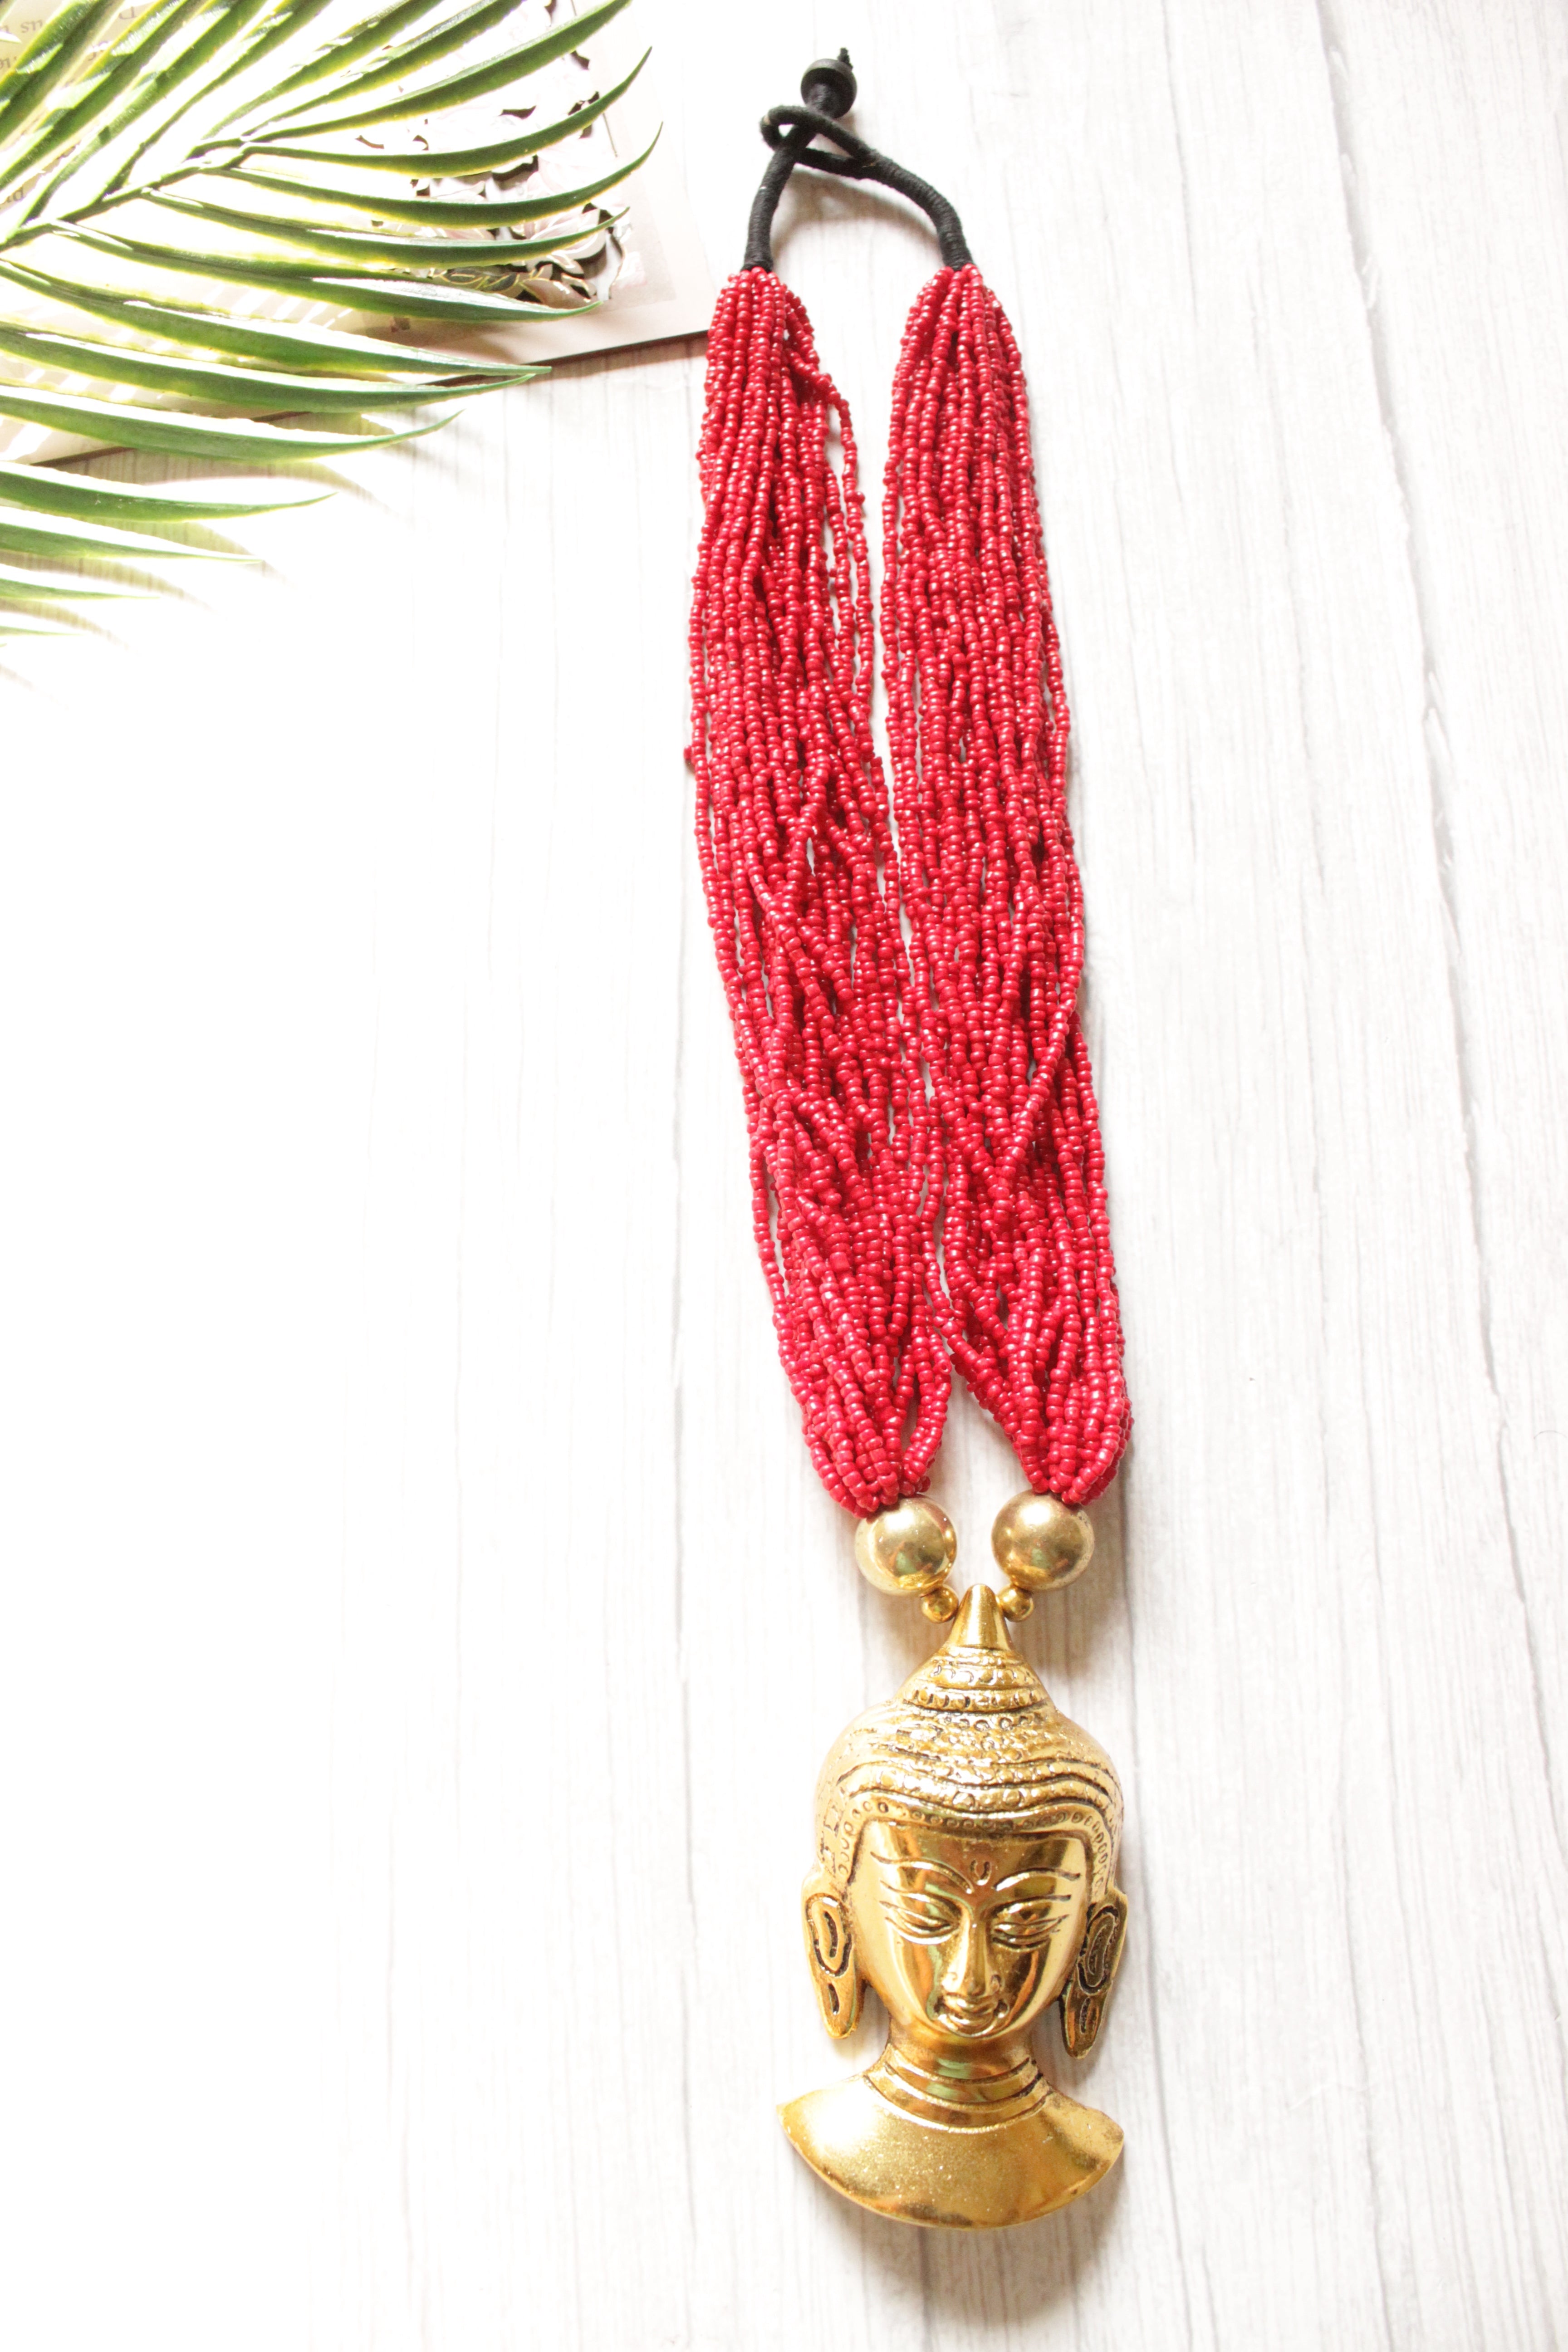 Red Beads Handcrafted Long Buddha Pendant Necklace